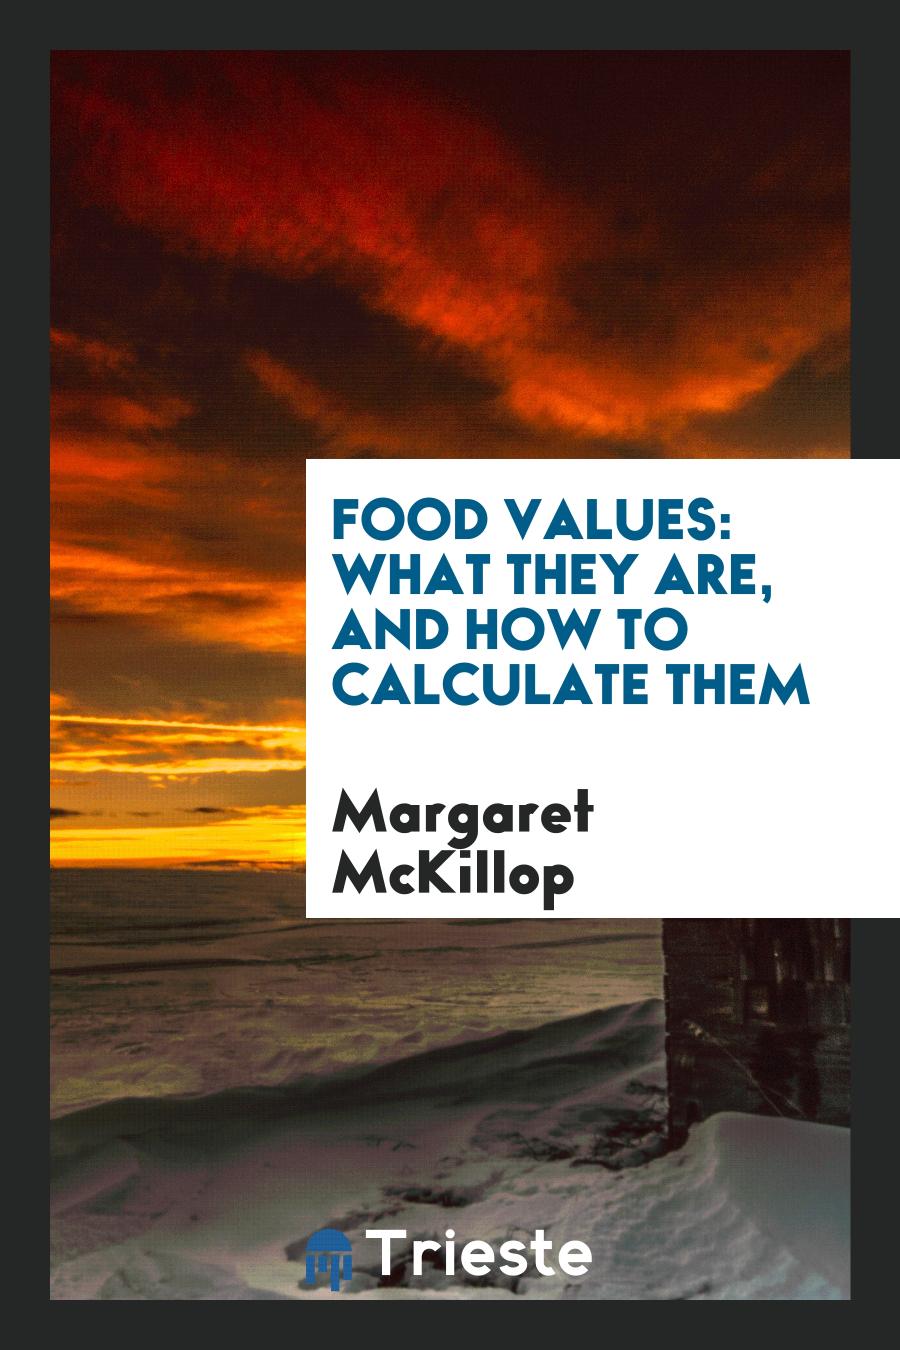 Food Values: What They Are, and How to Calculate Them